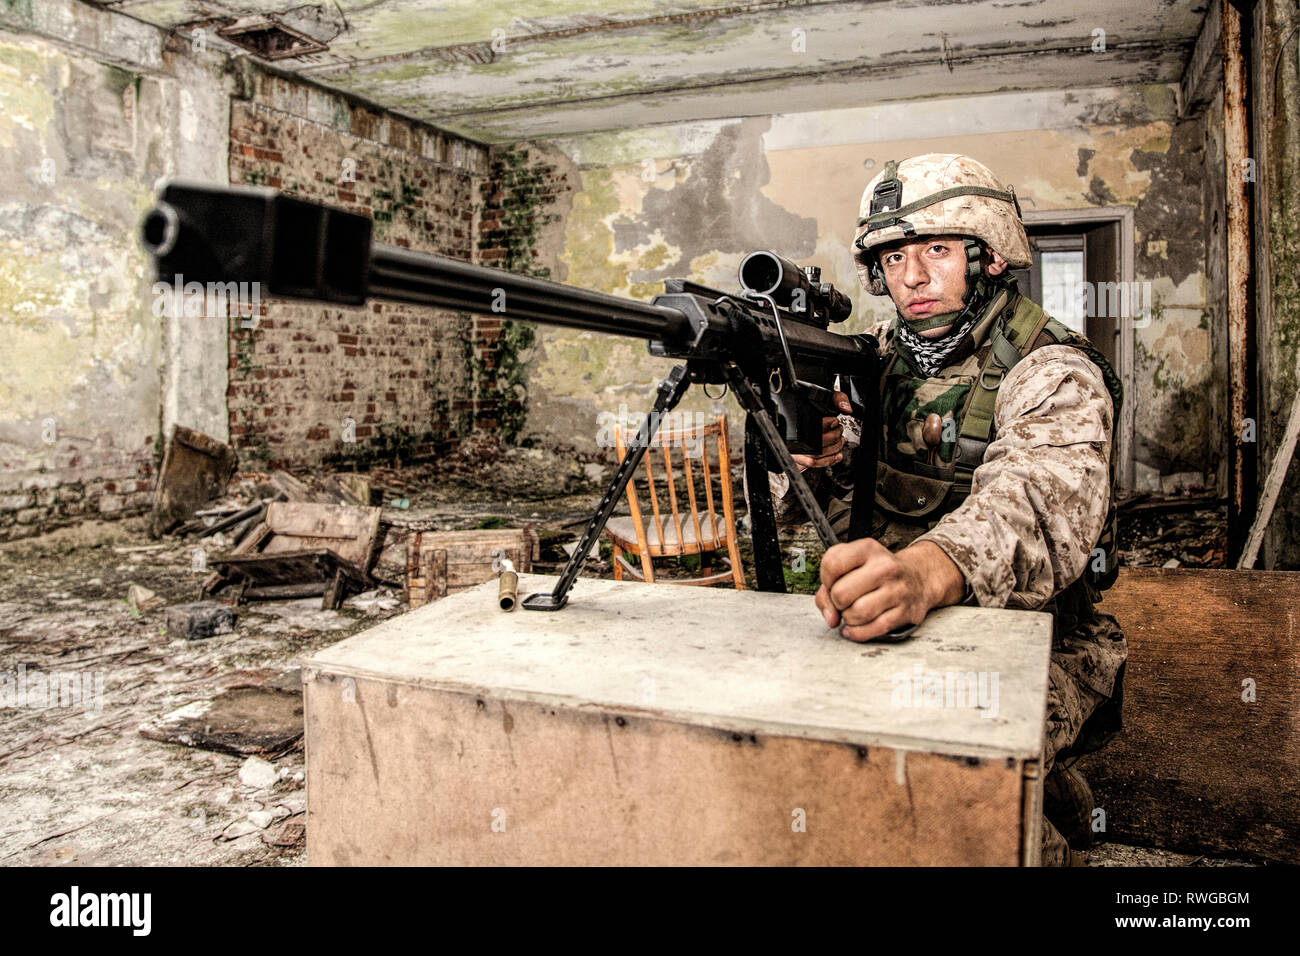 Military Sniper Armed With A 50 Caliber Sniper Rifle On Bipod Stock Photo Alamy